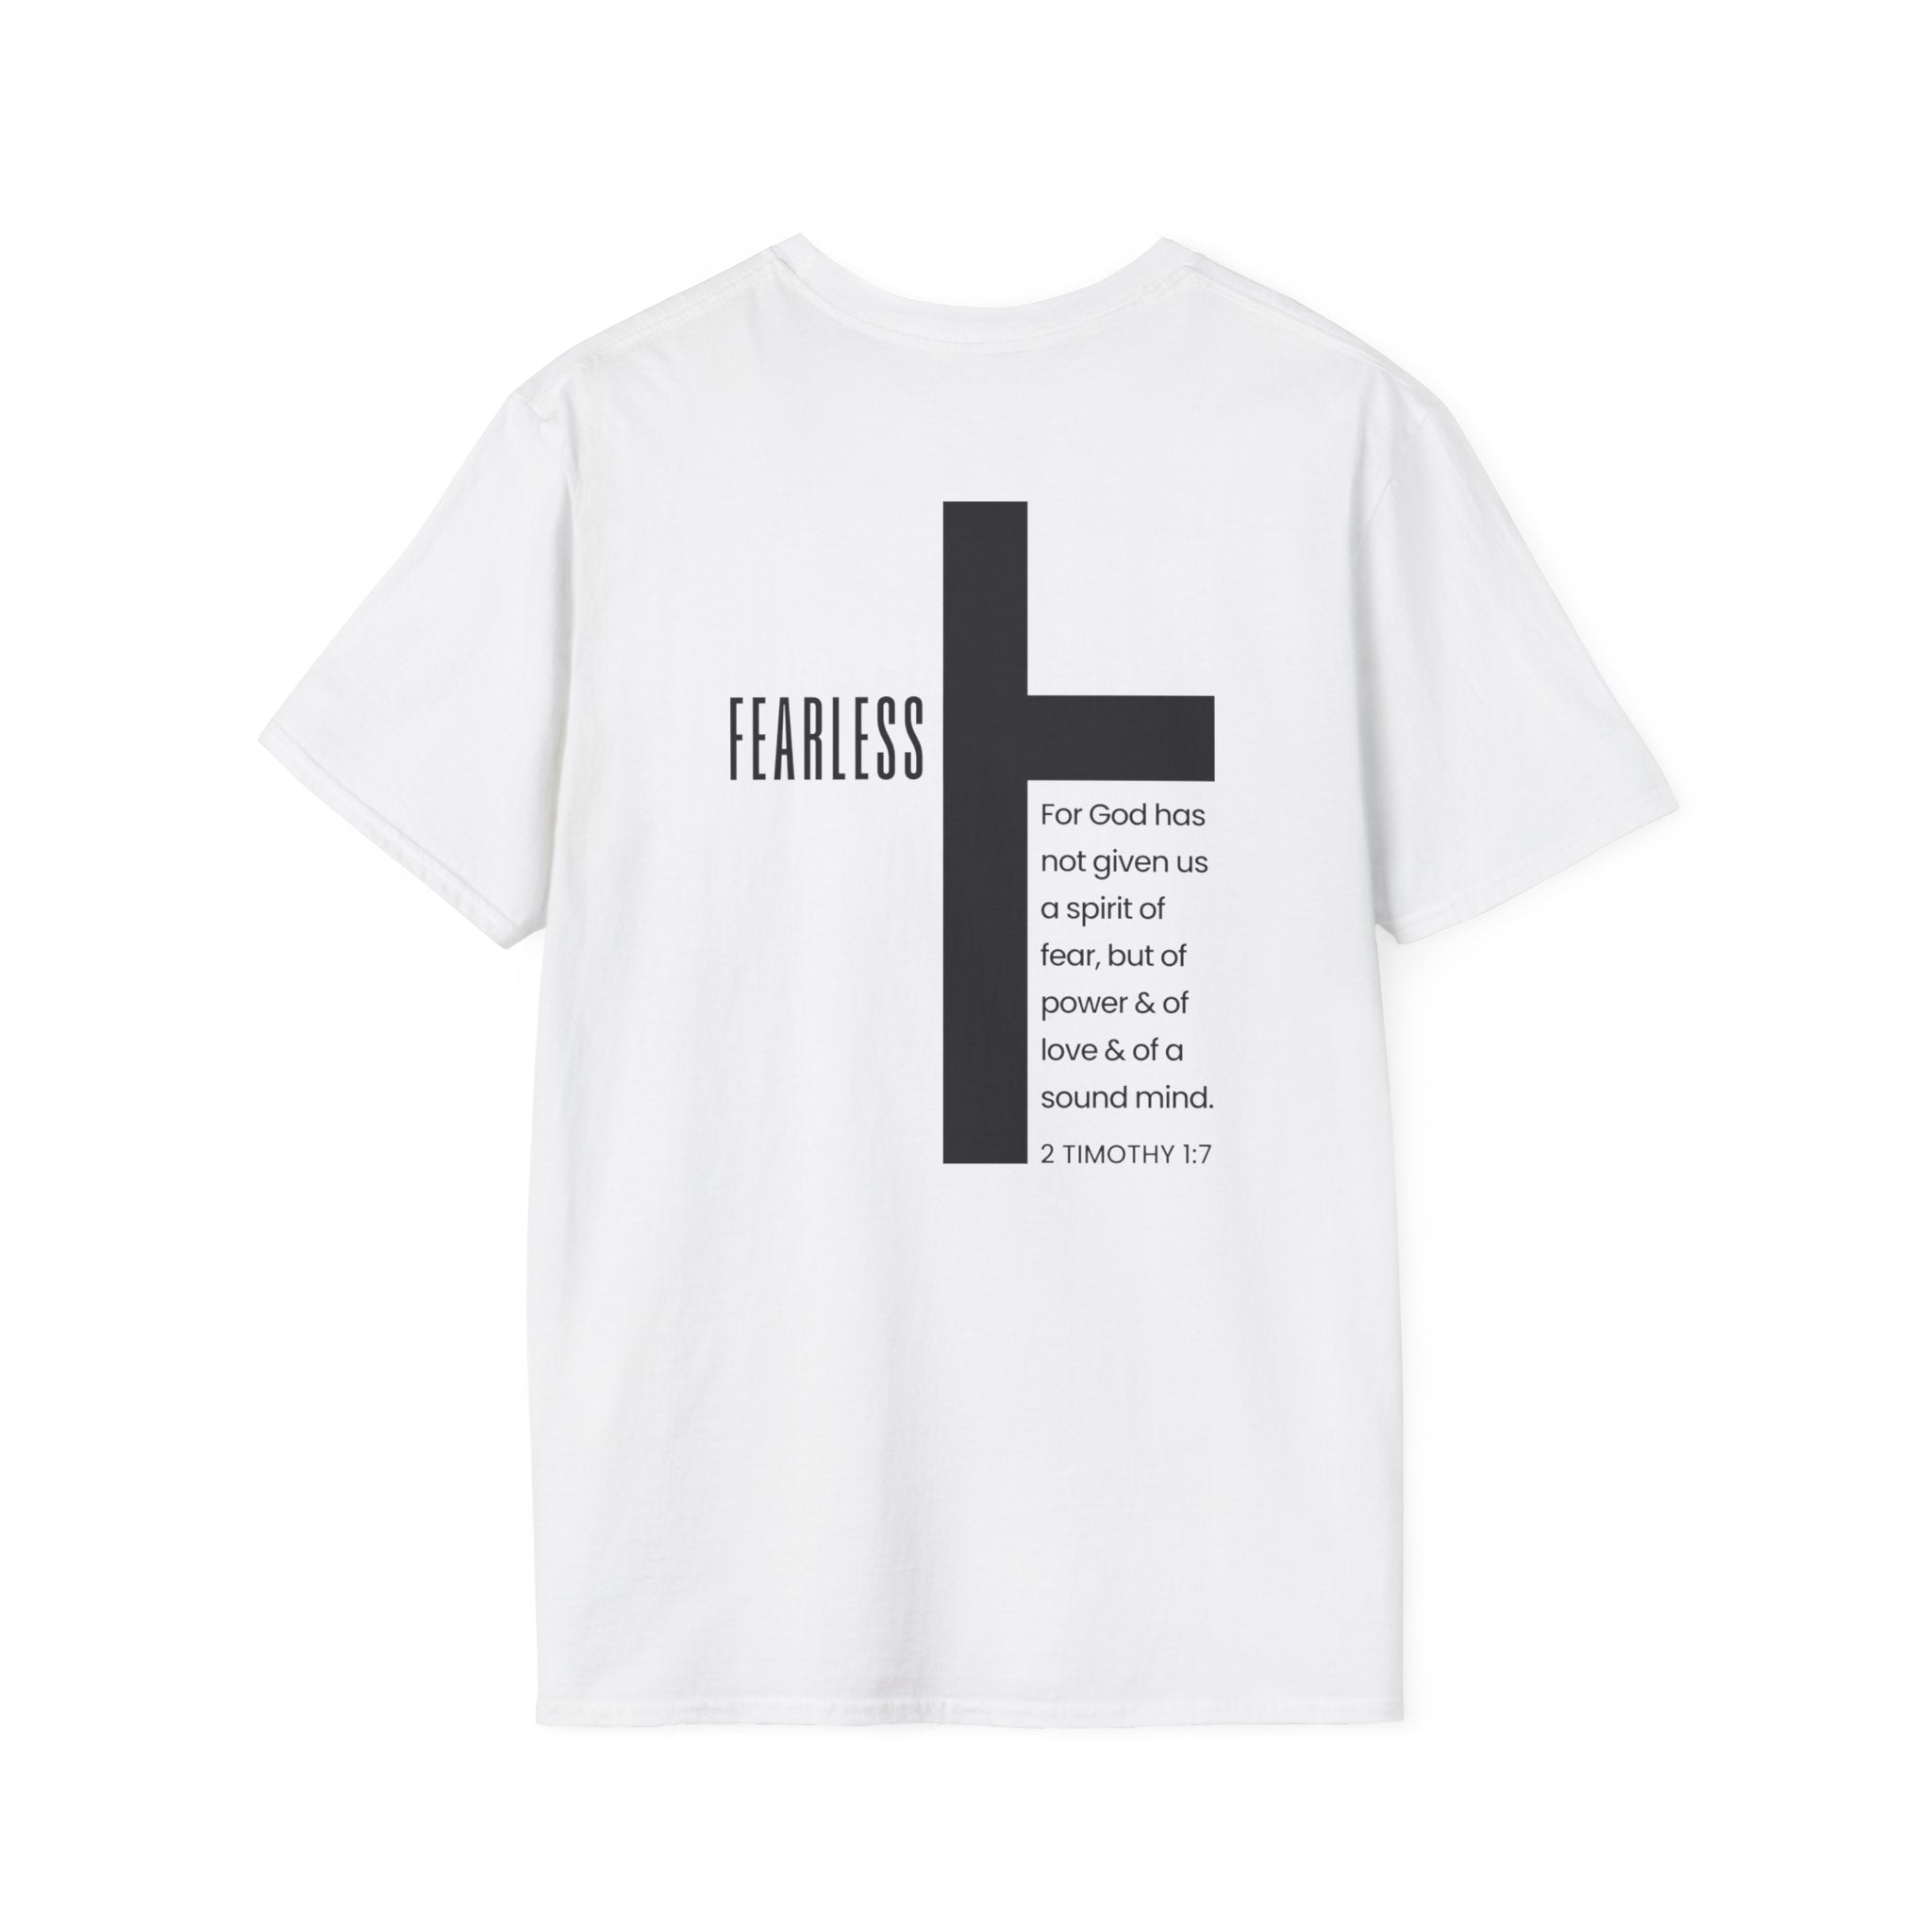 FEARLESS 2 Timothy 1:7 Unisex T-Shirt